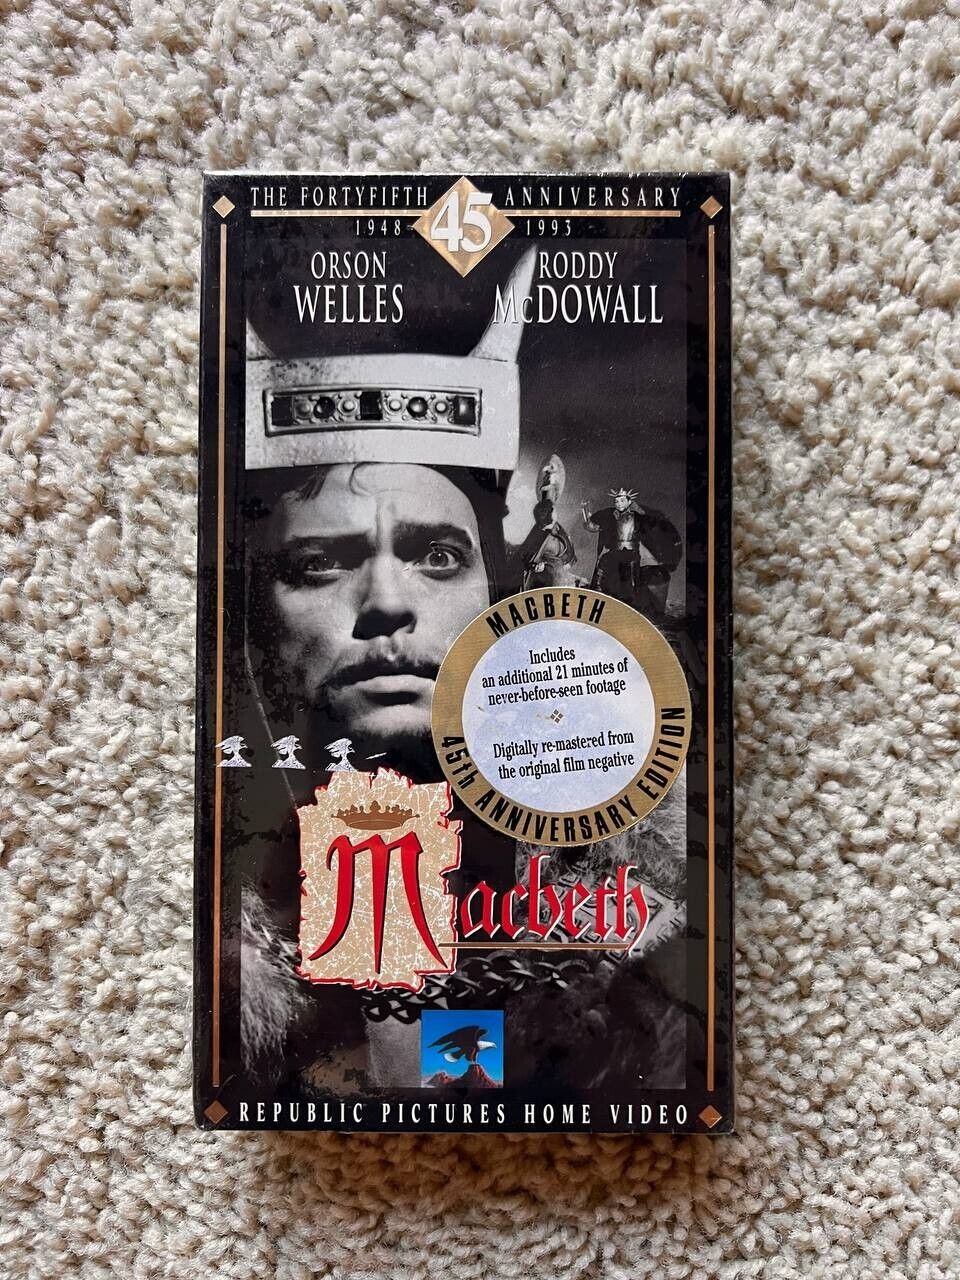 Macbeth 45th Anniversary Edition VHS Tape 5551 New Sealed 1992